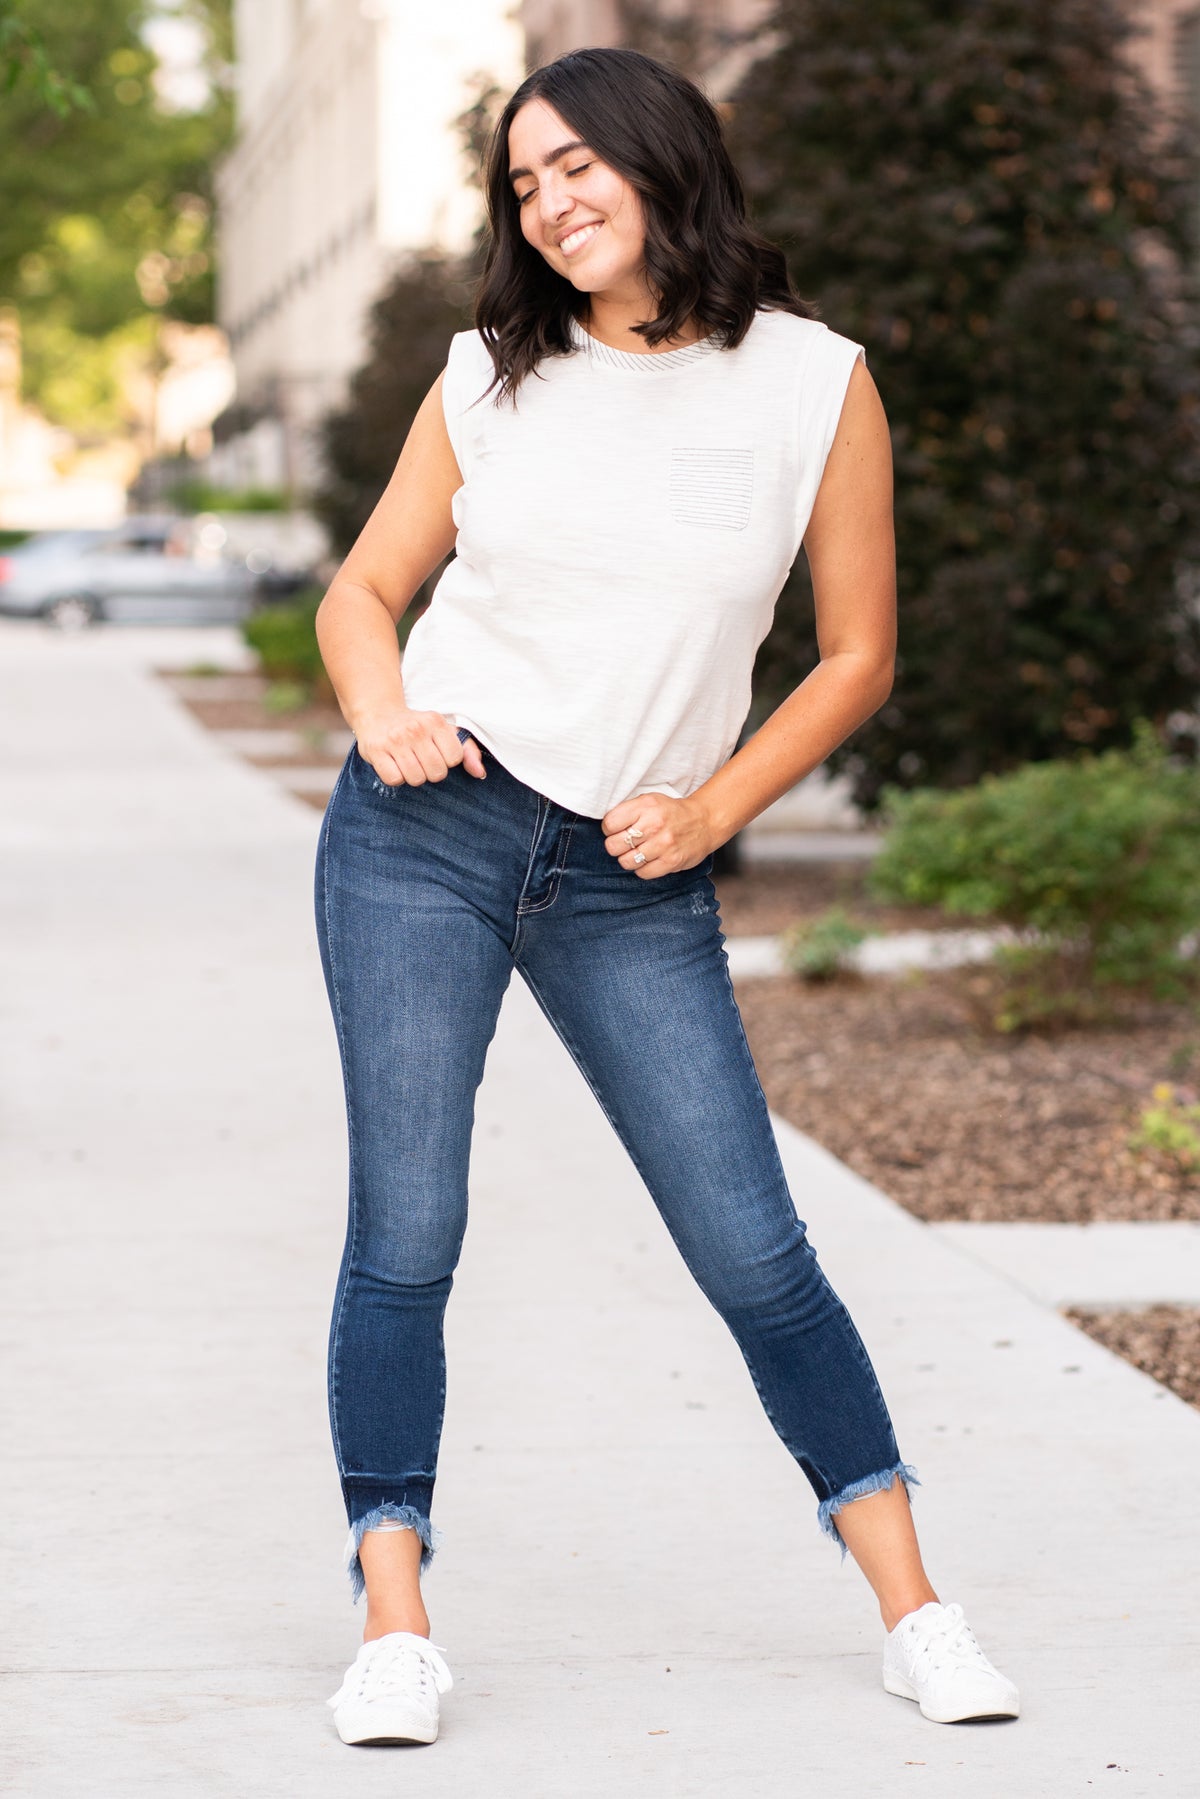 KanCan Jeans  Skinny jeans still hit the spot. These high-rise jeans hit at exactly the right spot on your waist and with some spandex, these will stretch as you wear and get super comfy!   KanCan Stretch Level: Comfort Stretch   Color: Dark Blue Cut: Ankle Skinny, 26.5" Inseam Rise: High-Rise, 9.5" Front Rise COTTON 94% POLYESTER 4% SPANDEX 2% Style #: KC7119D Contact us for any additional measurements or sizing.